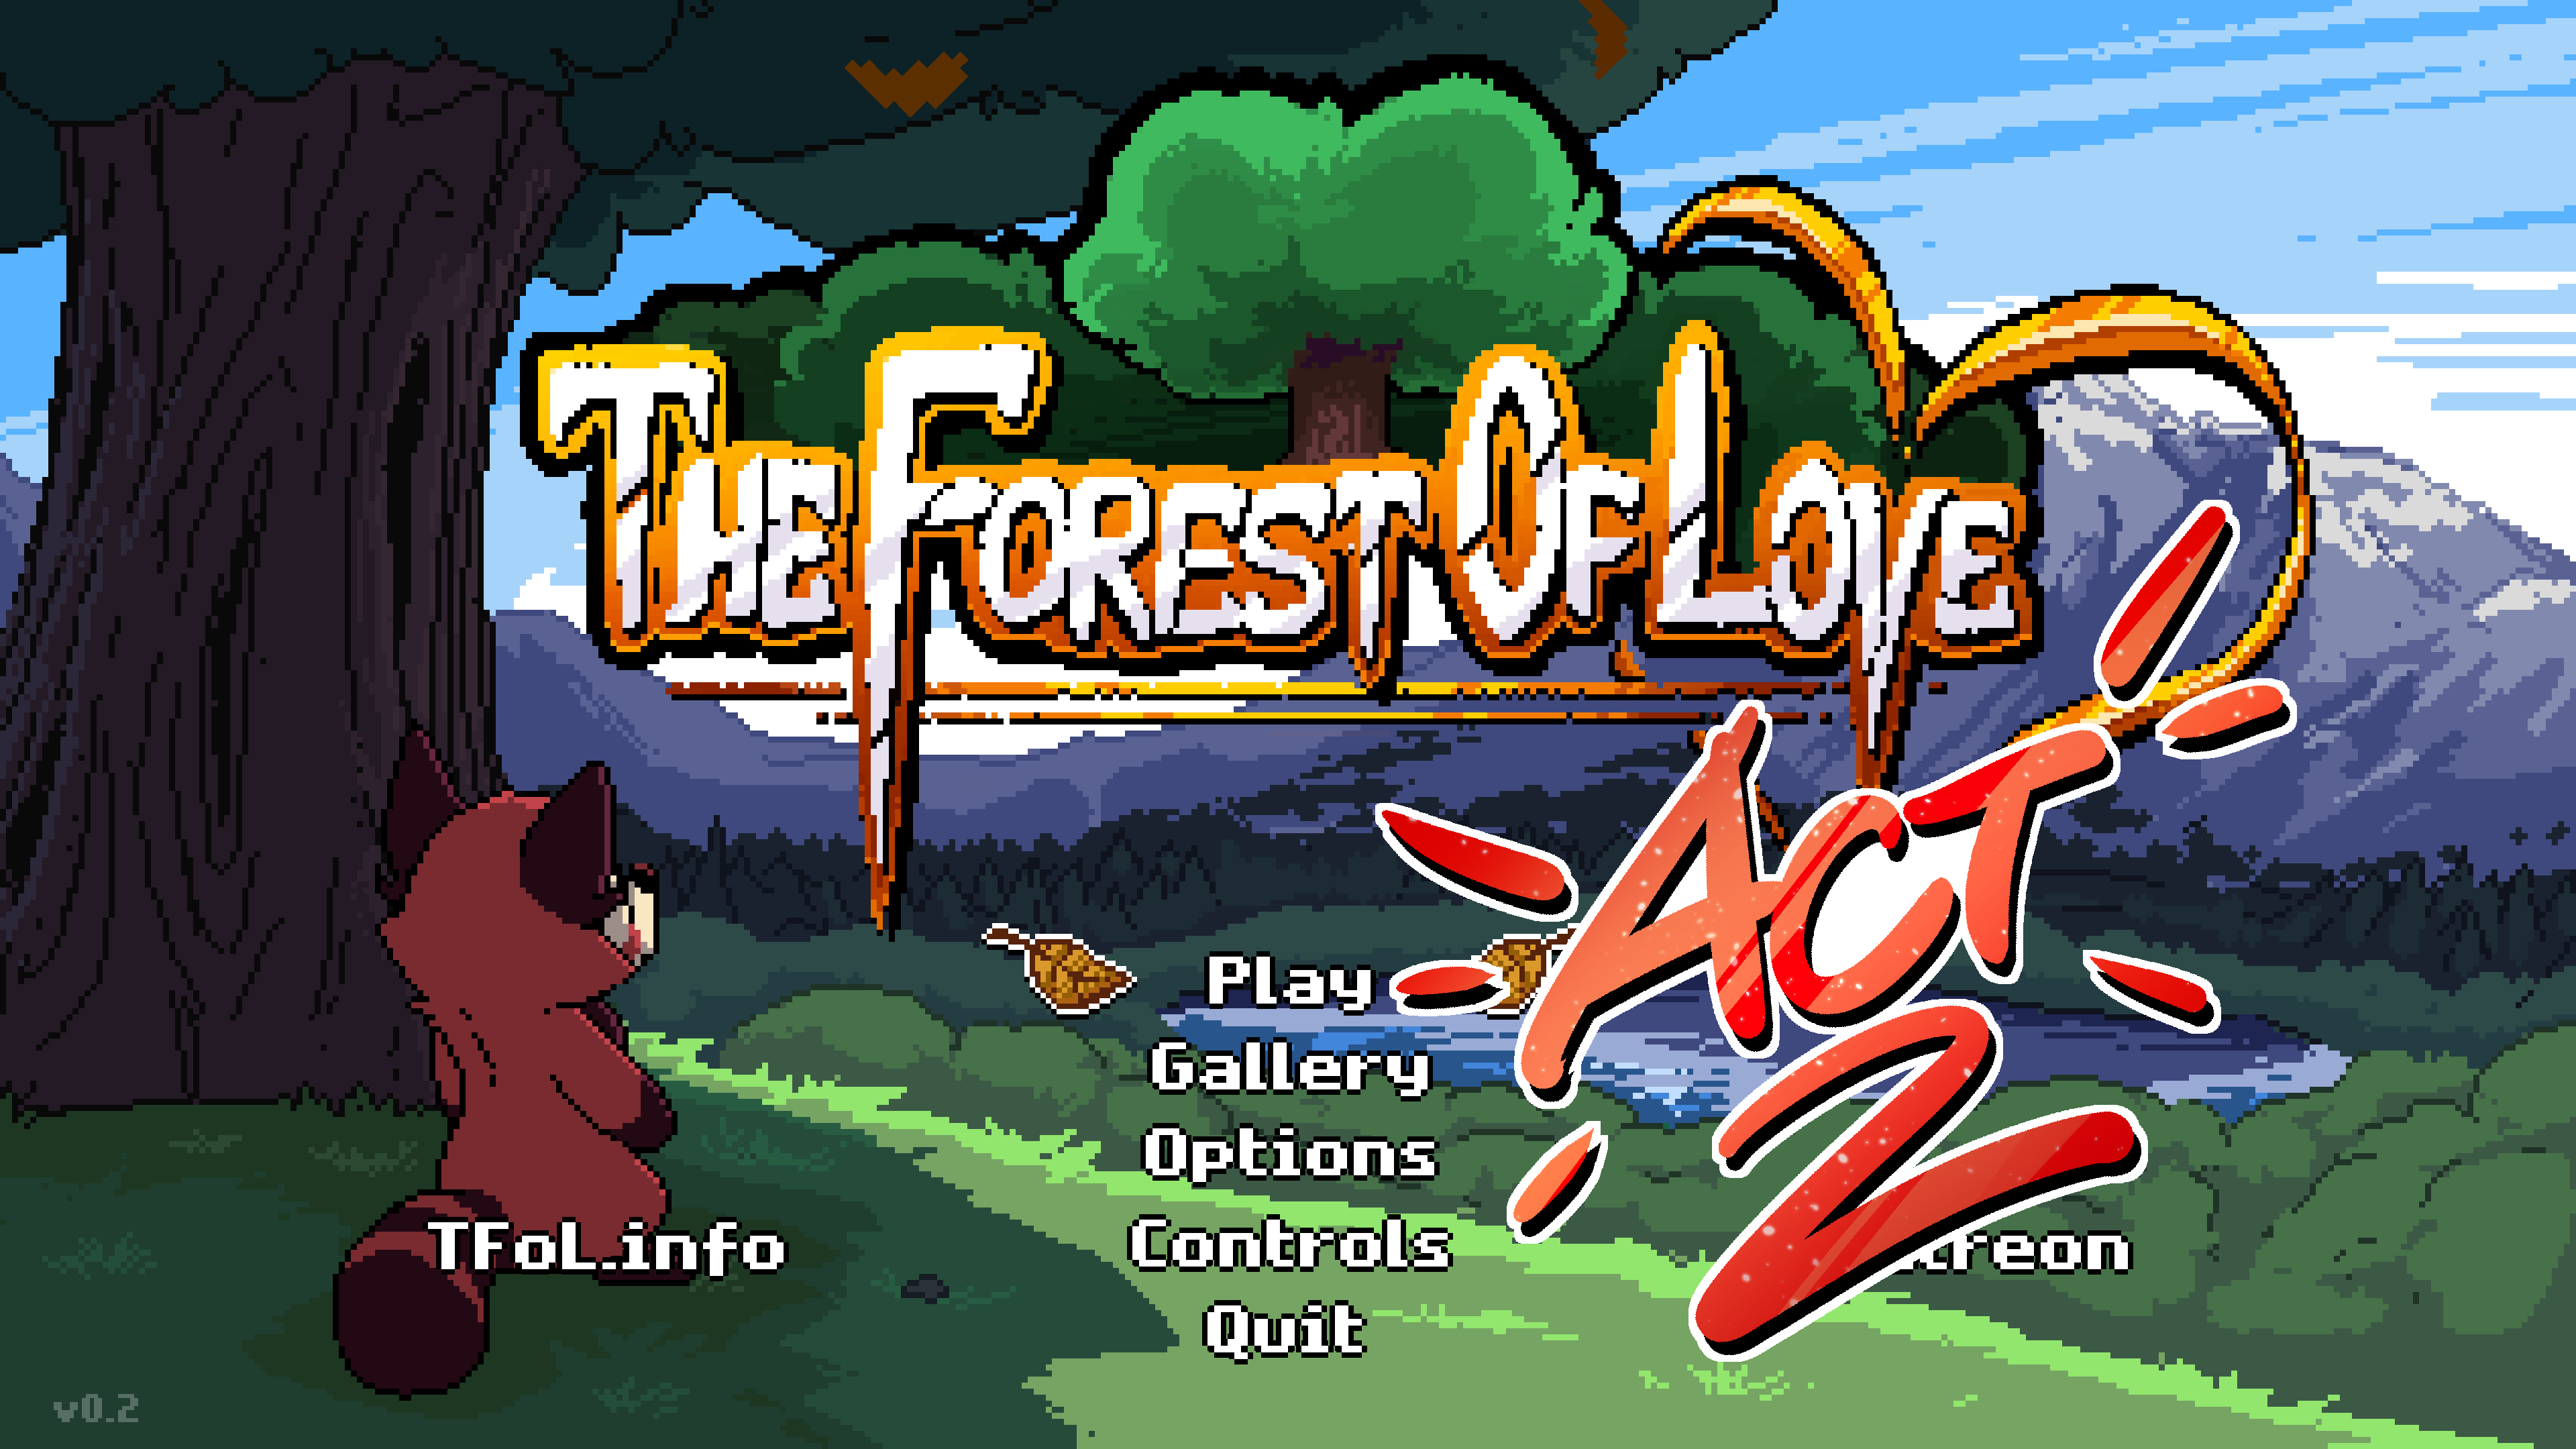 4 Play Porn Game - The Forest of Love by Carrot